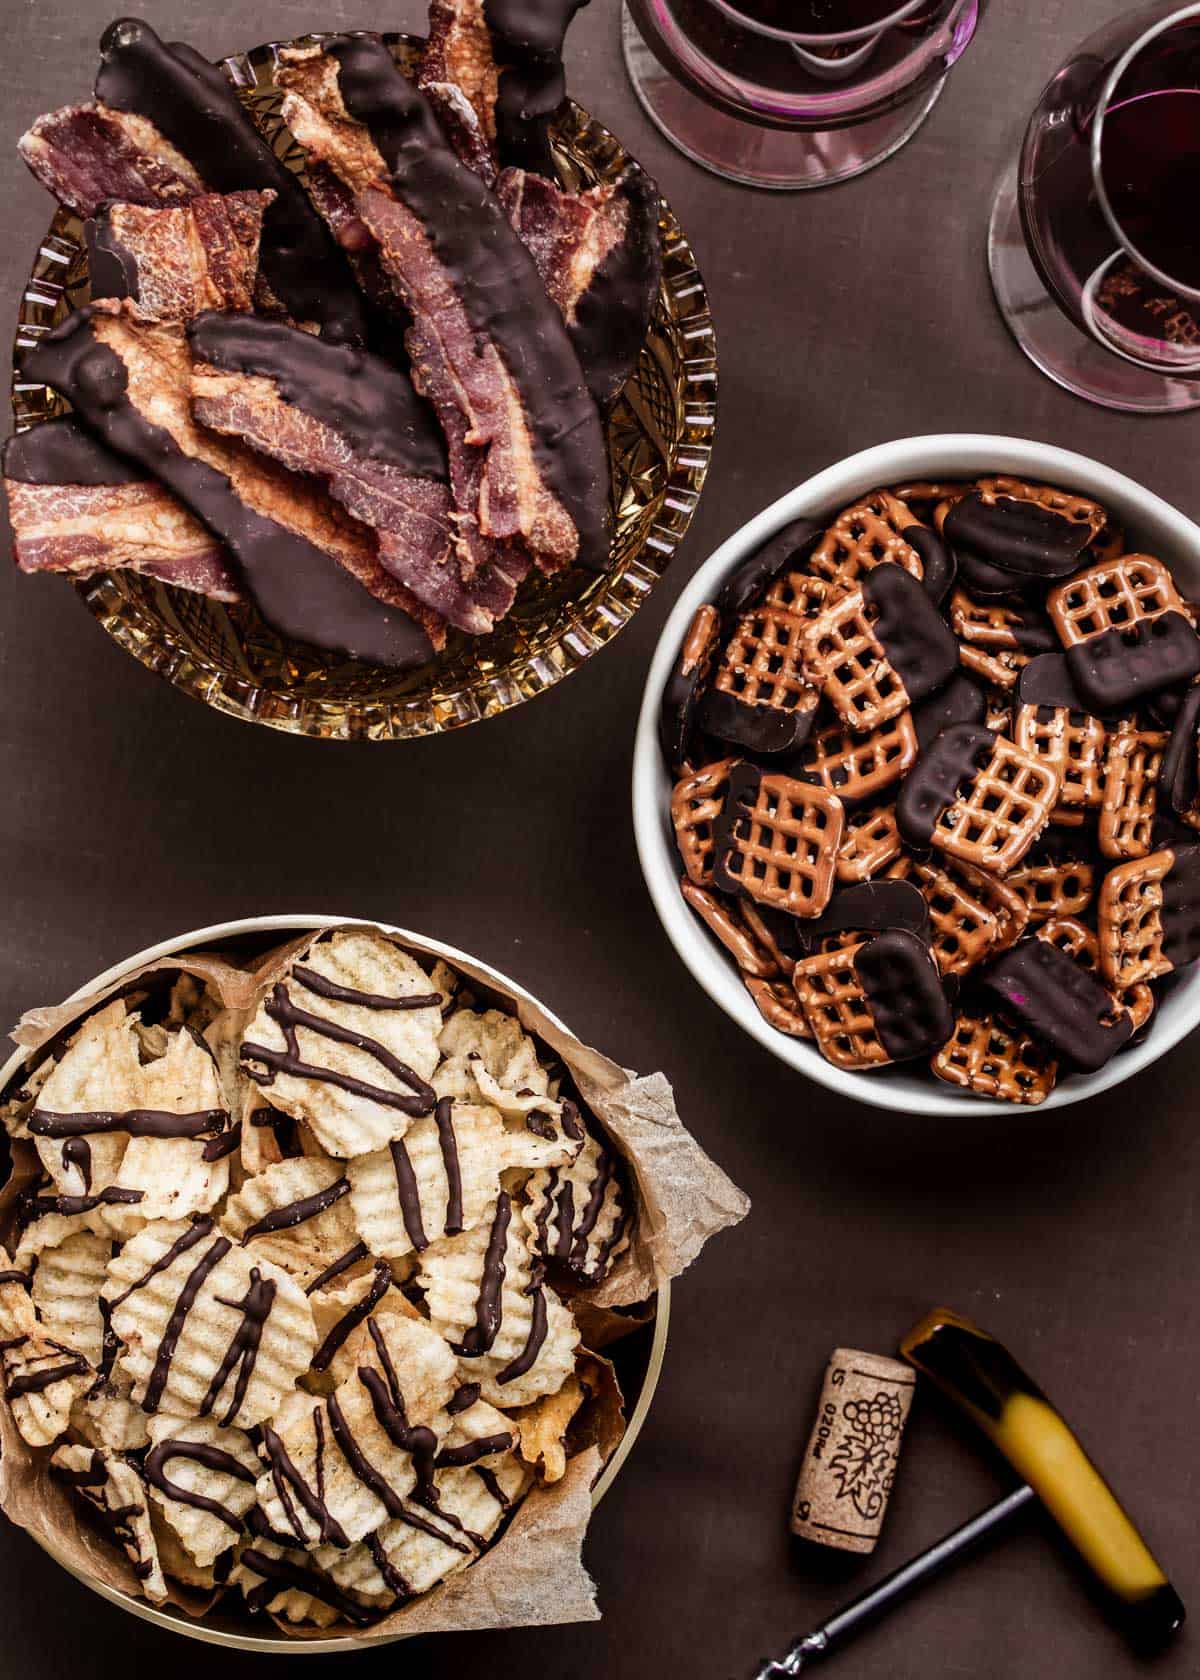 chocolate dipped bacon, pretzels, and potato chips in bowls on brown table.